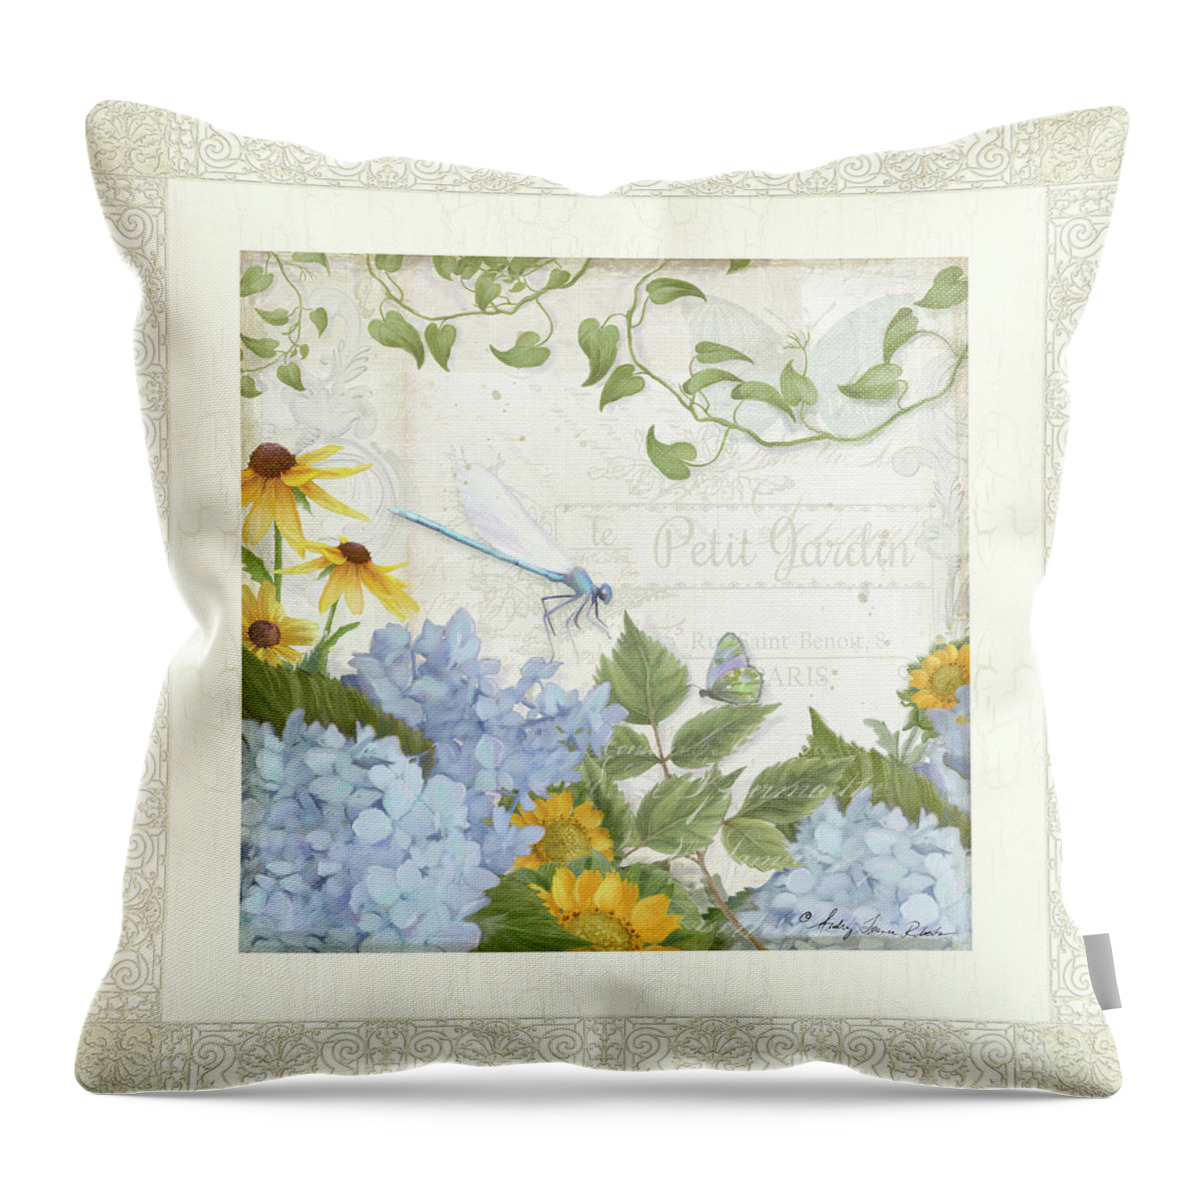 Le Petit Jardin Throw Pillow featuring the painting Le Petit Jardin 2 - Garden Floral W Dragonfly, Butterfly, Daisies And Blue Hydrangeas w Border by Audrey Jeanne Roberts